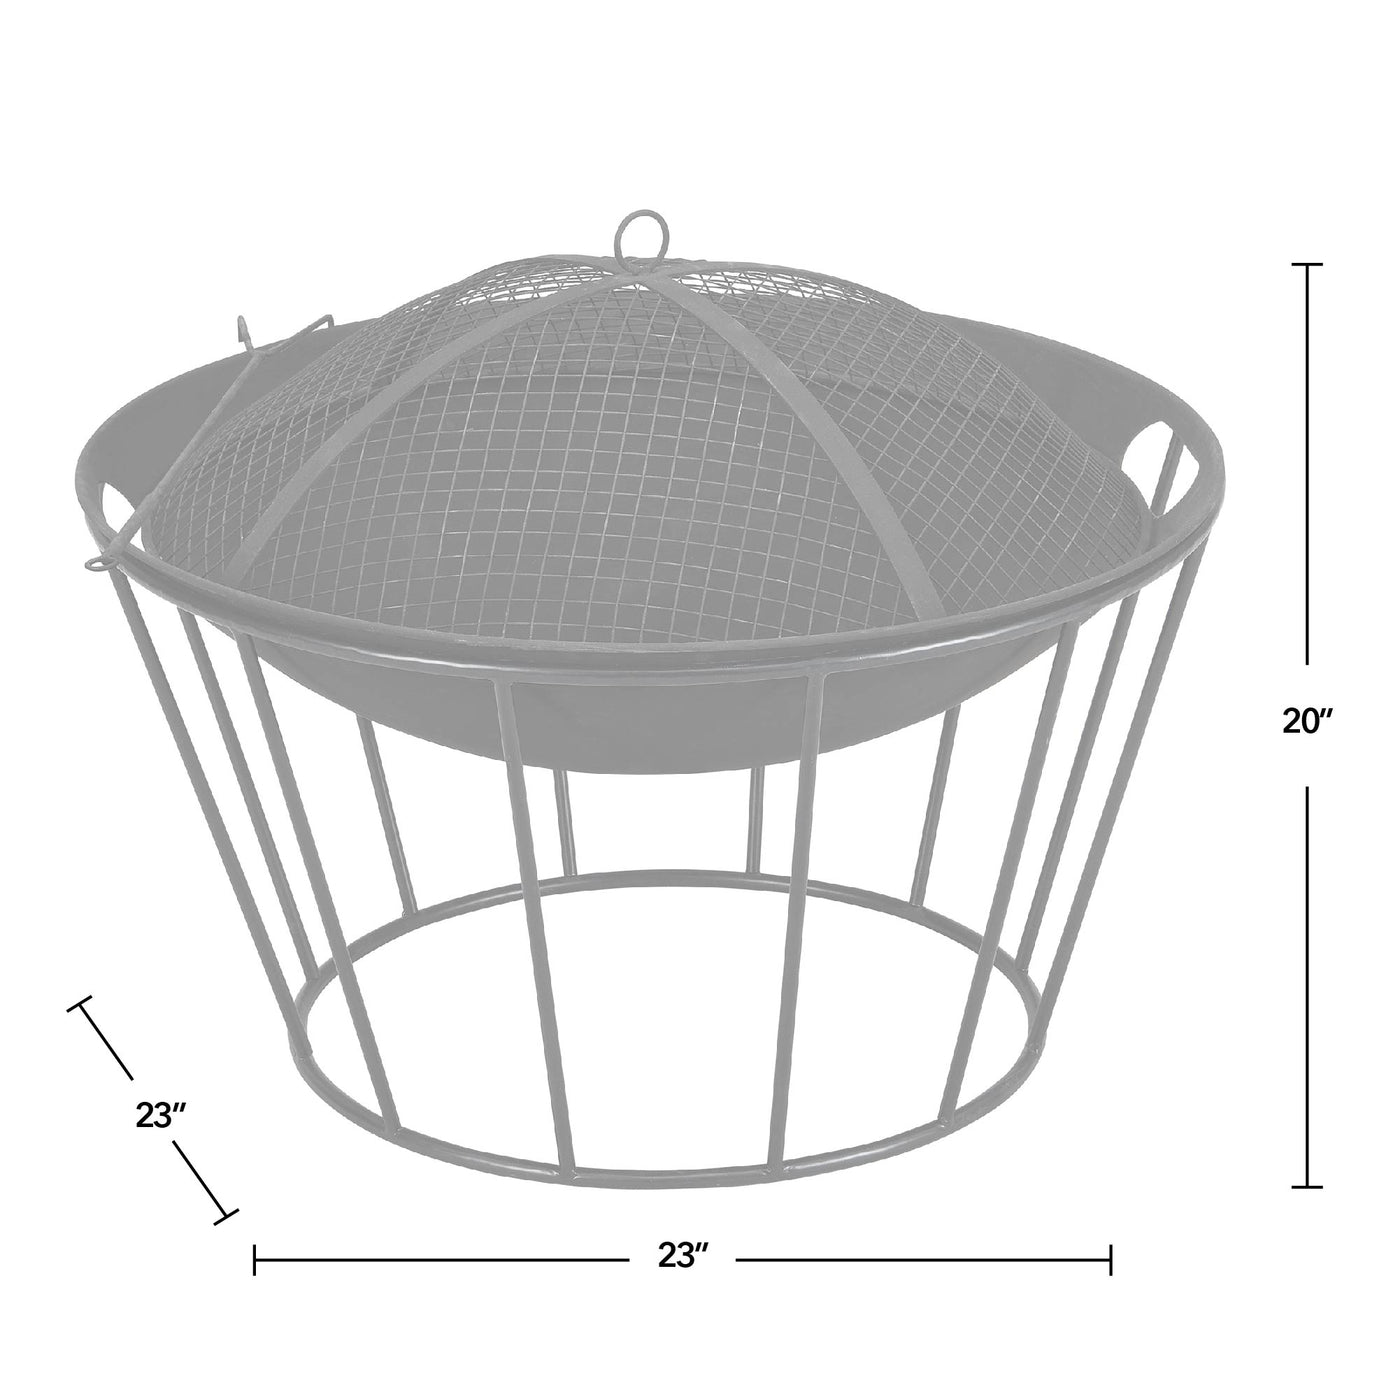 FirsTime & Co. Black Lakeview Fire Pit With Screen Lid, Modern Style, Made of Metal